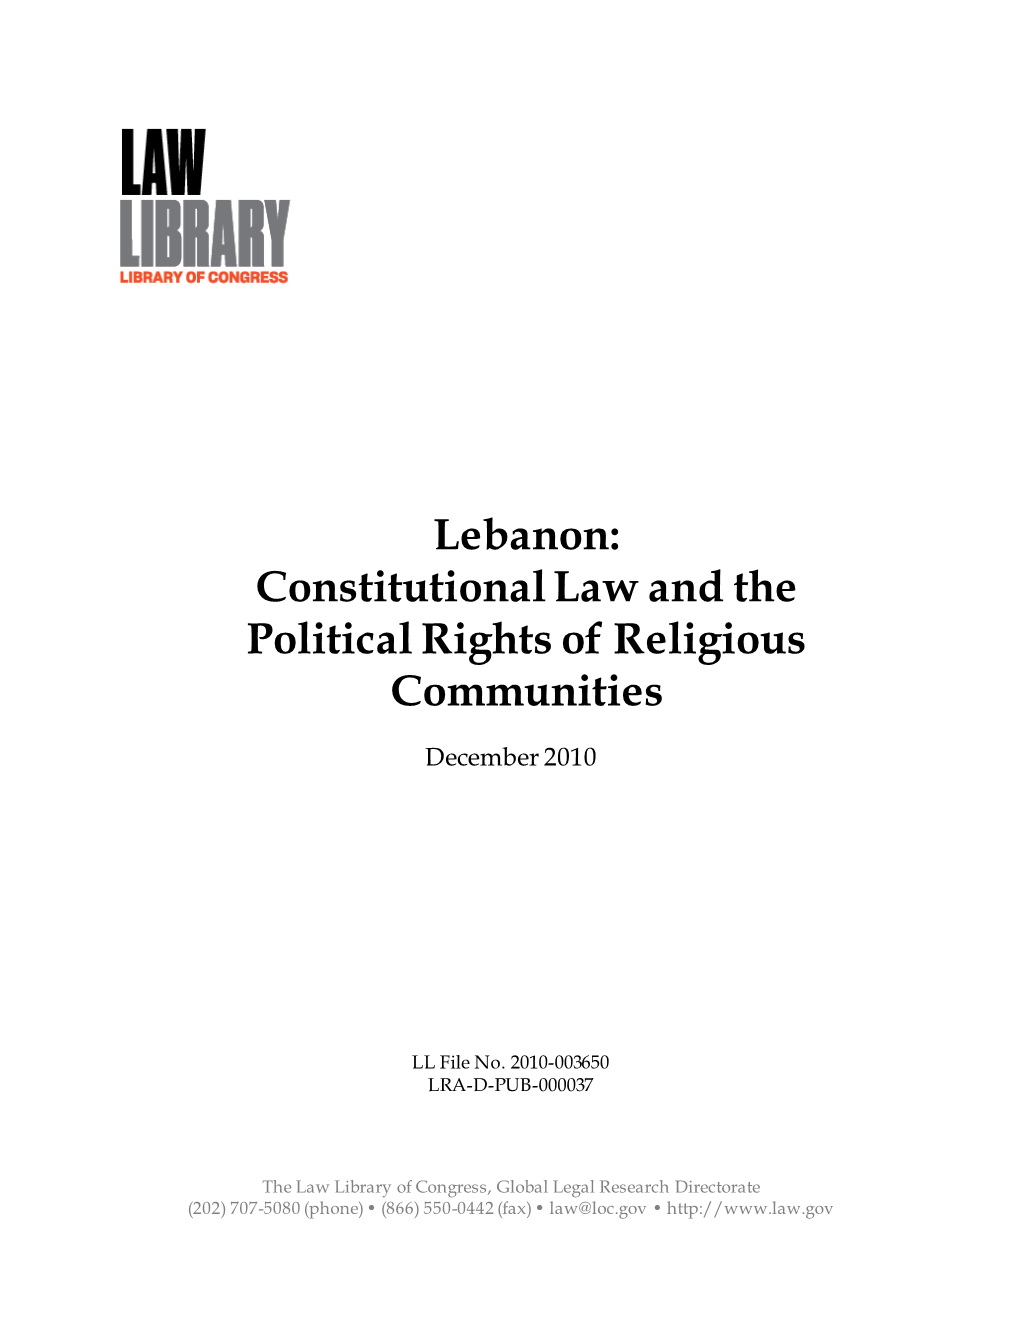 Lebanon: Constitutional Law and the Political Rights of Religious Communities